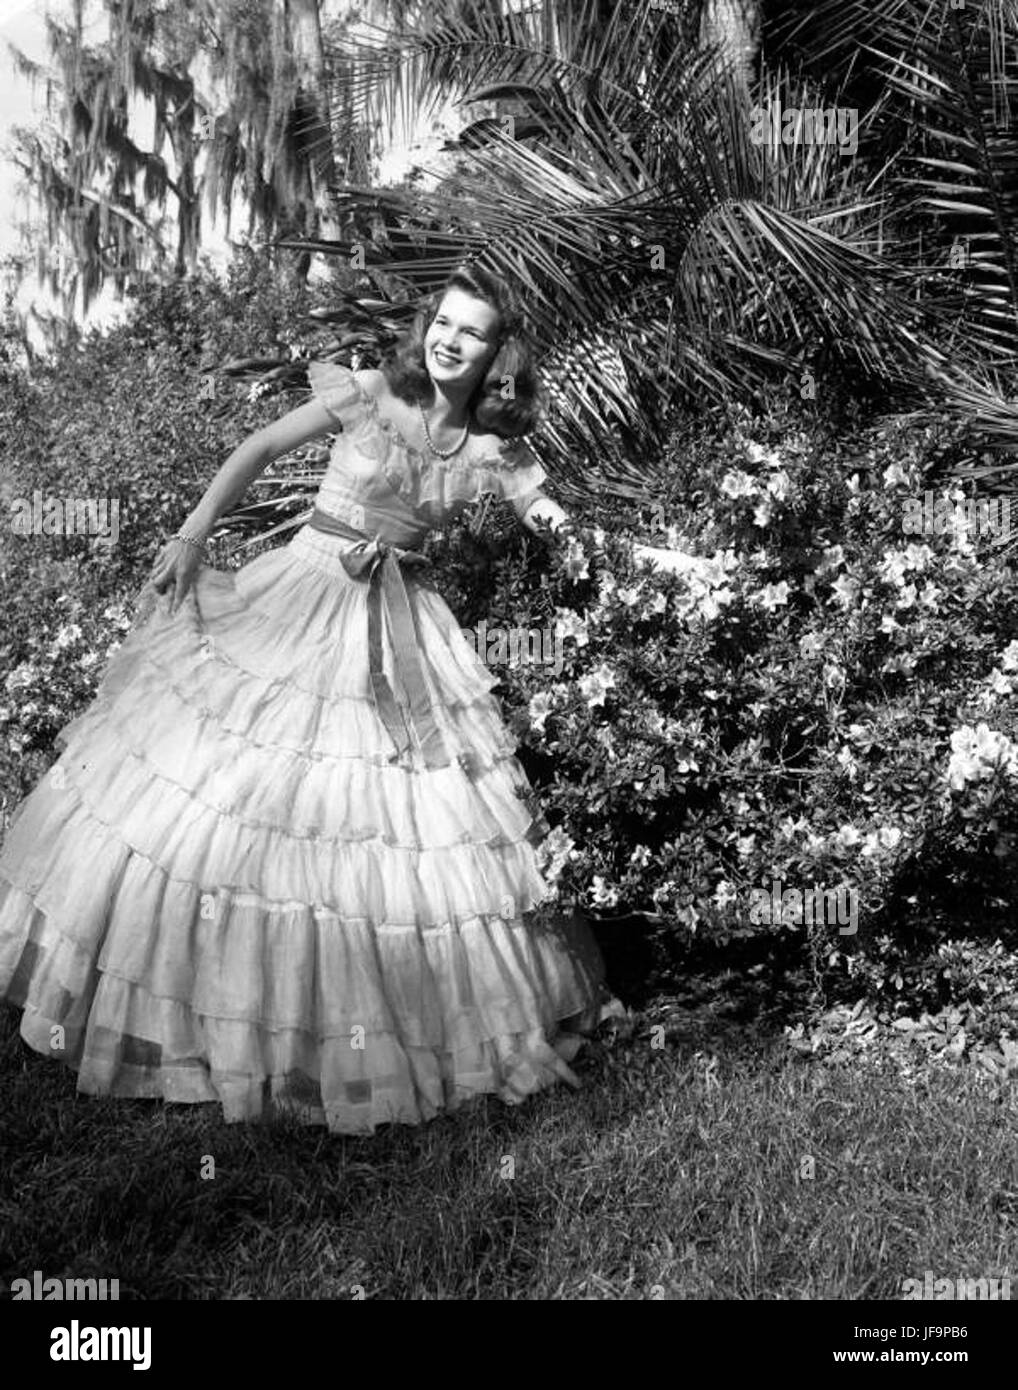 Nance Stilley in an antique dress at the Cypress Gardens 34487909684 o Stock Photo